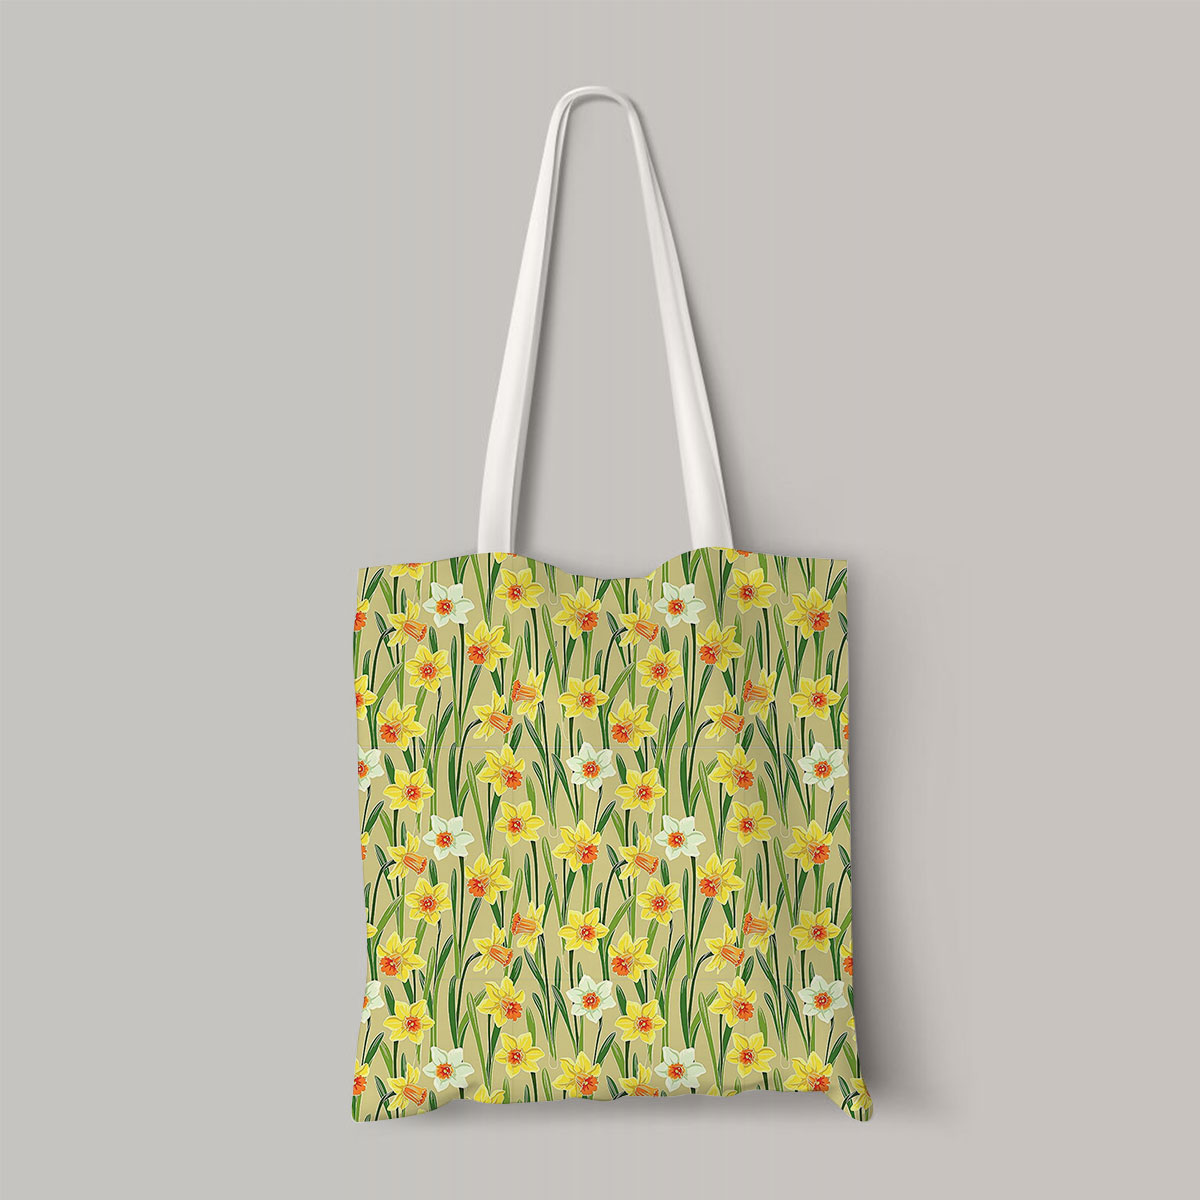 Yellow Jonquil Daffodil Narcissus Totebag